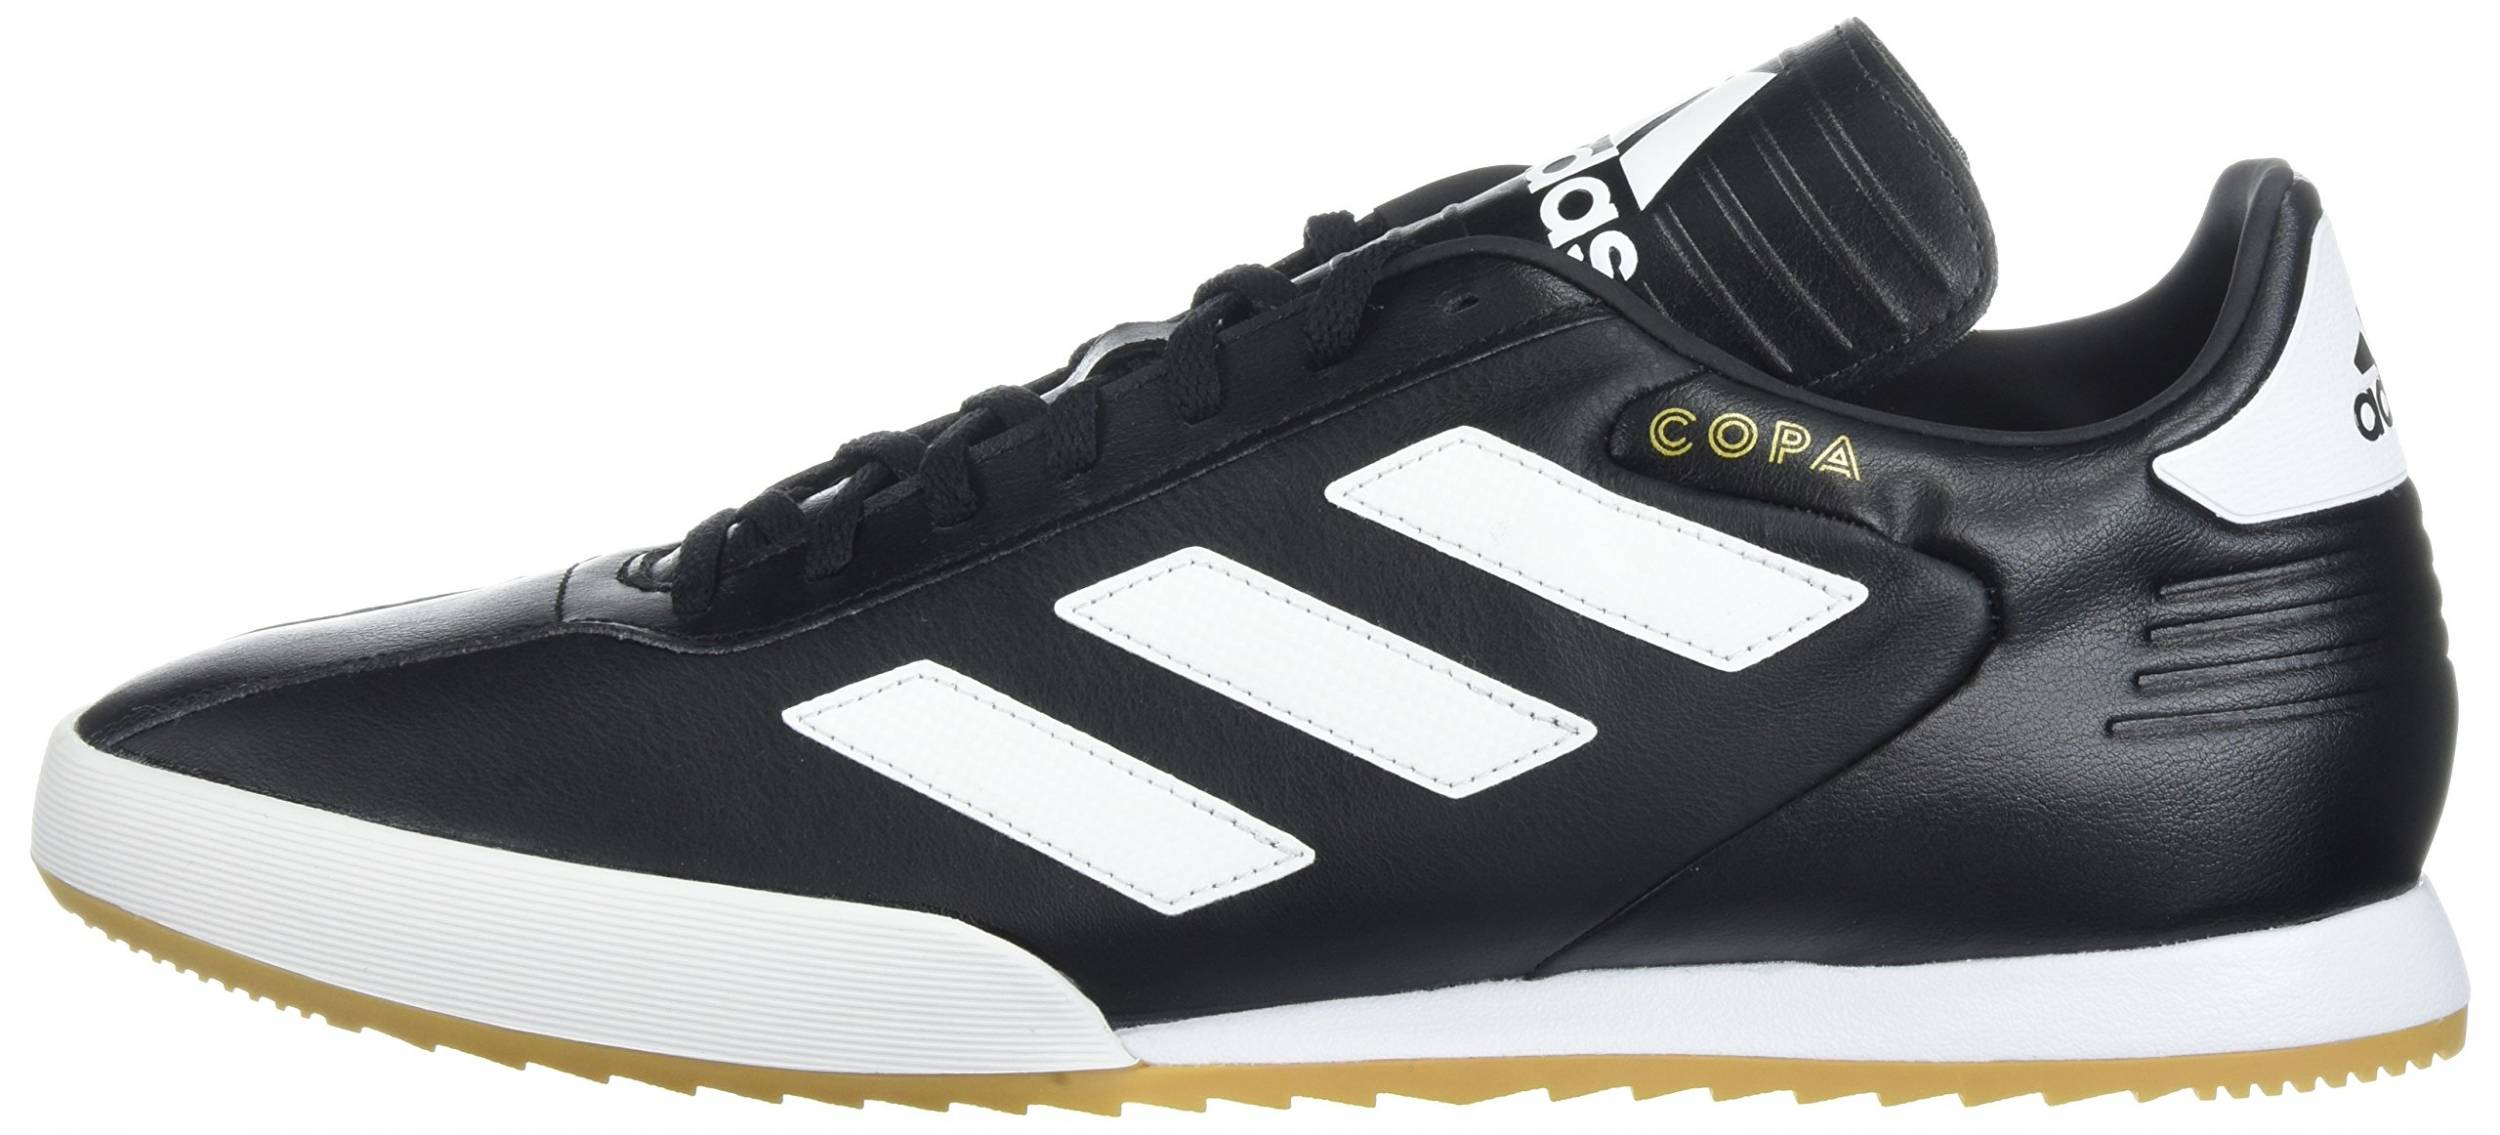 Only $45 + Review of Adidas Copa Super | RunRepeat